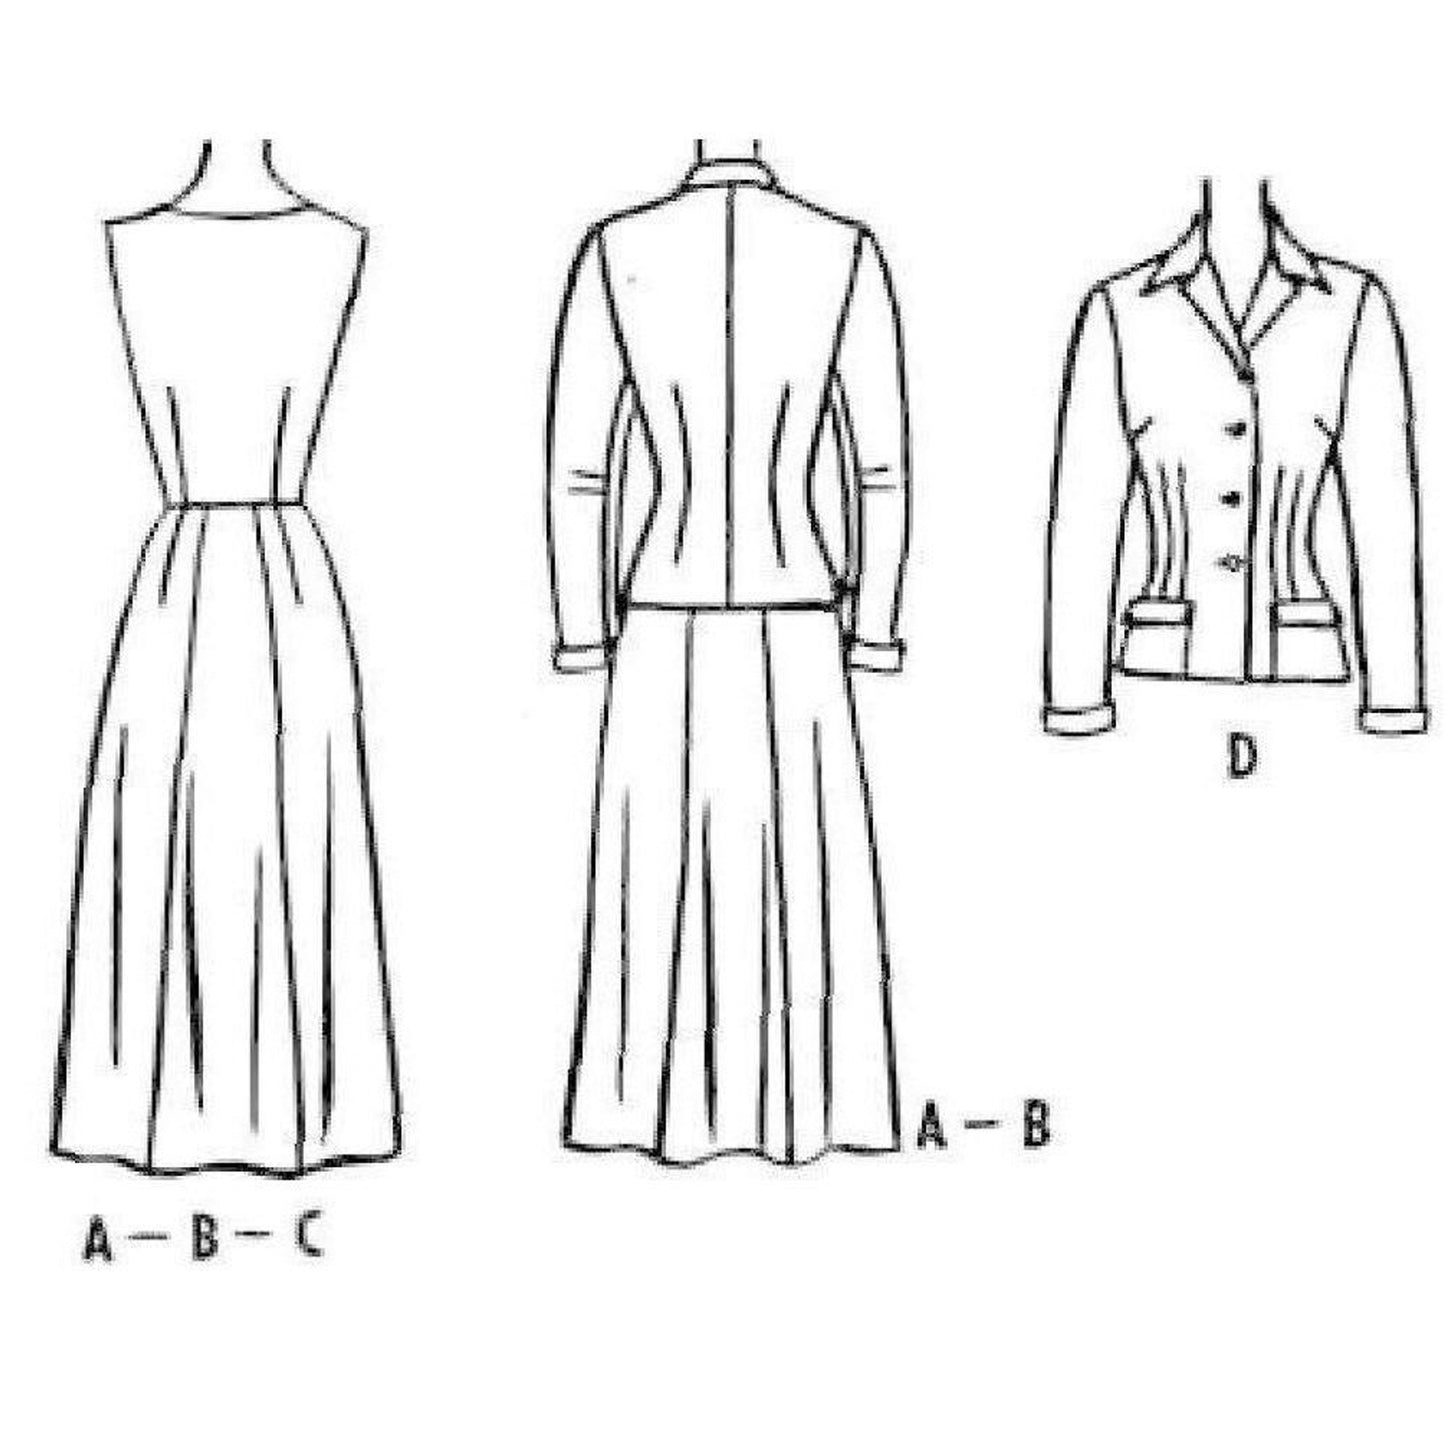 Line drawings of back views of  jacket and dress